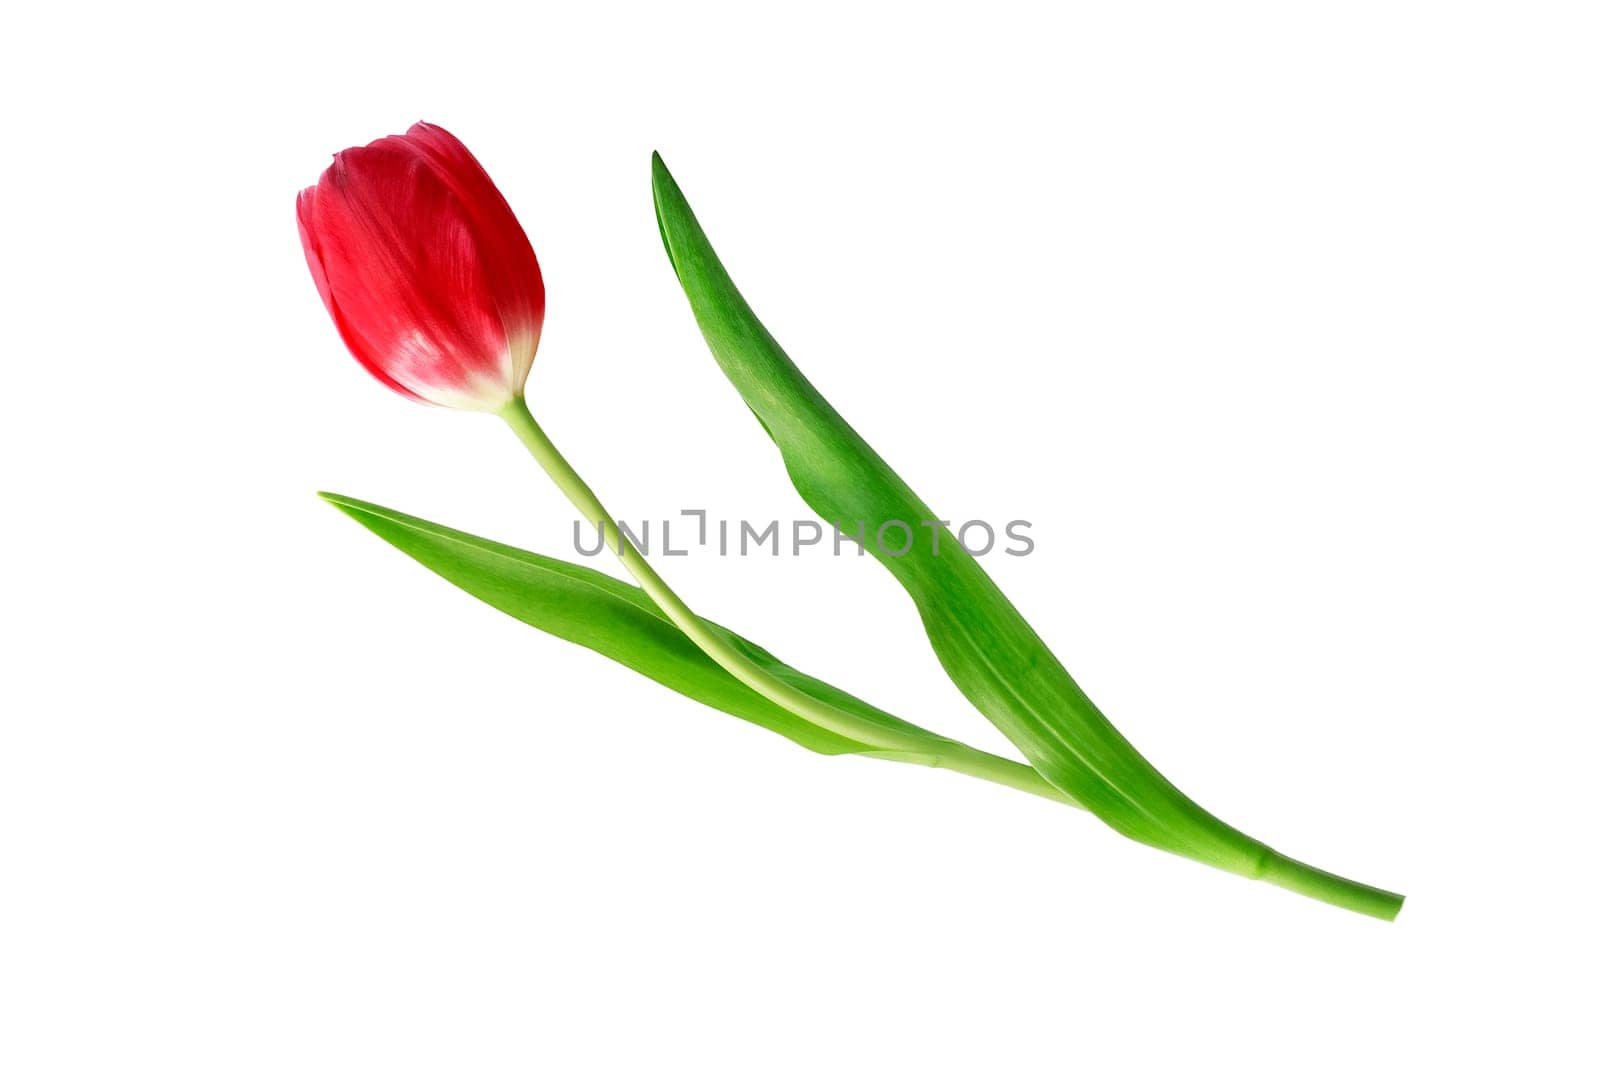 Beautiful red tulip flower on white background. Top view